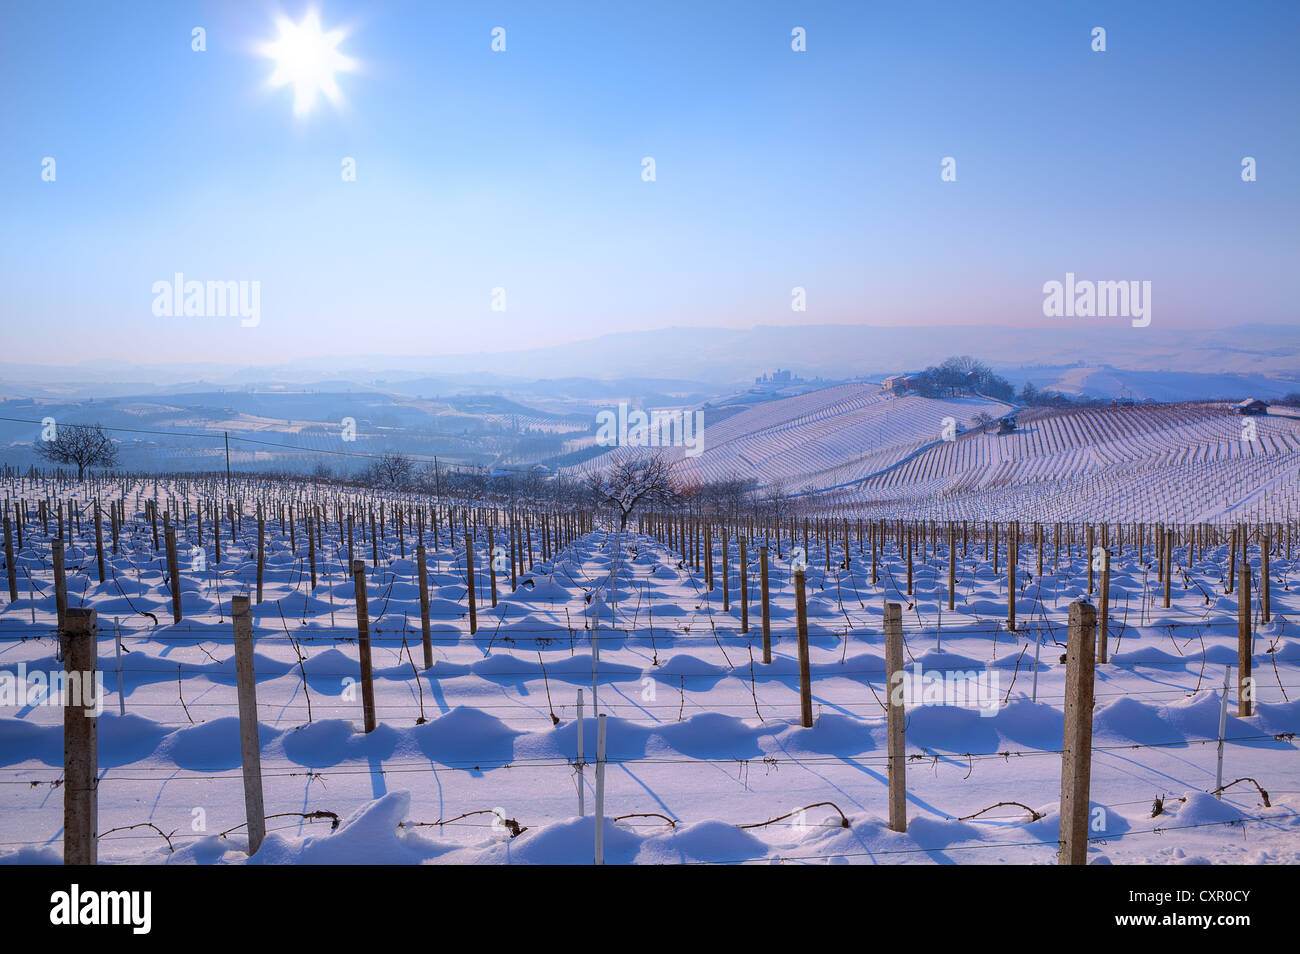 View on vineyards on snowy hills under clear blue sky with shining sun at winter in Piedmont, Northern Italy. Stock Photo